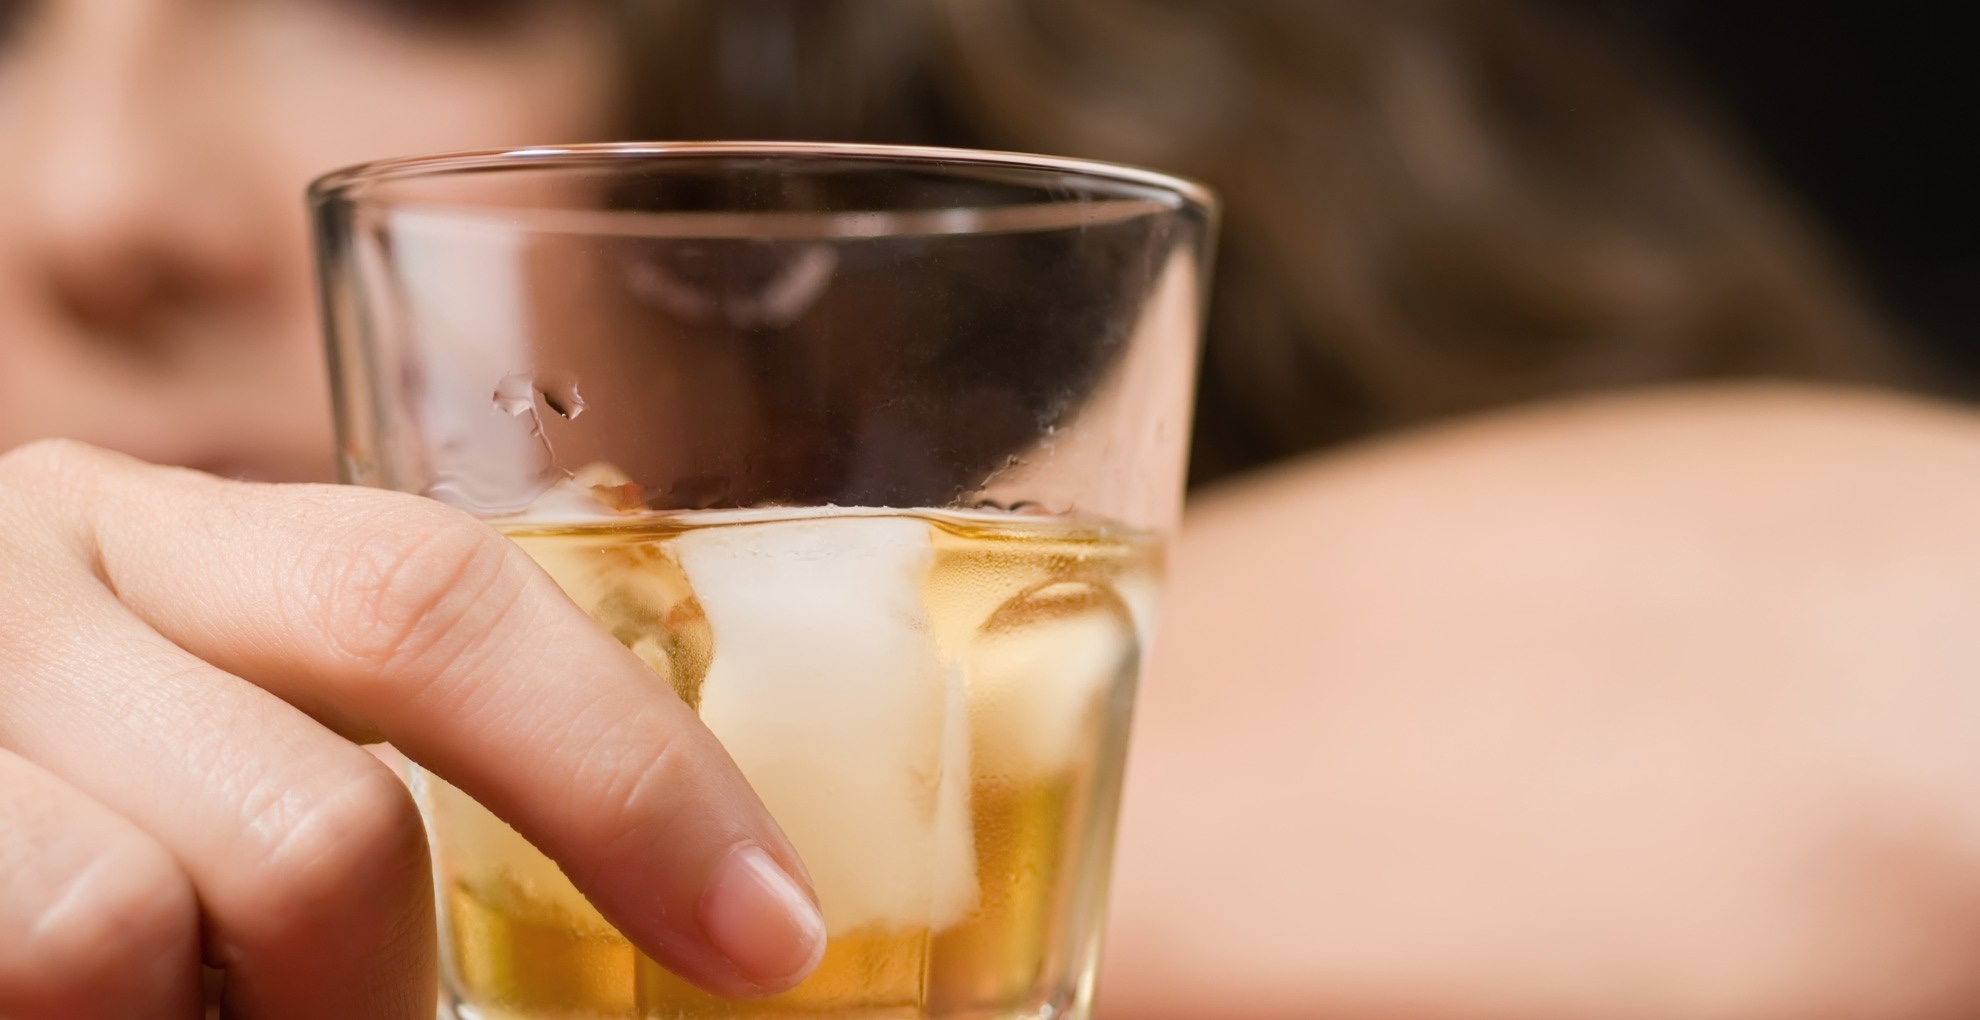 Women are more likely to experience health consequences at lower levels of drinking.